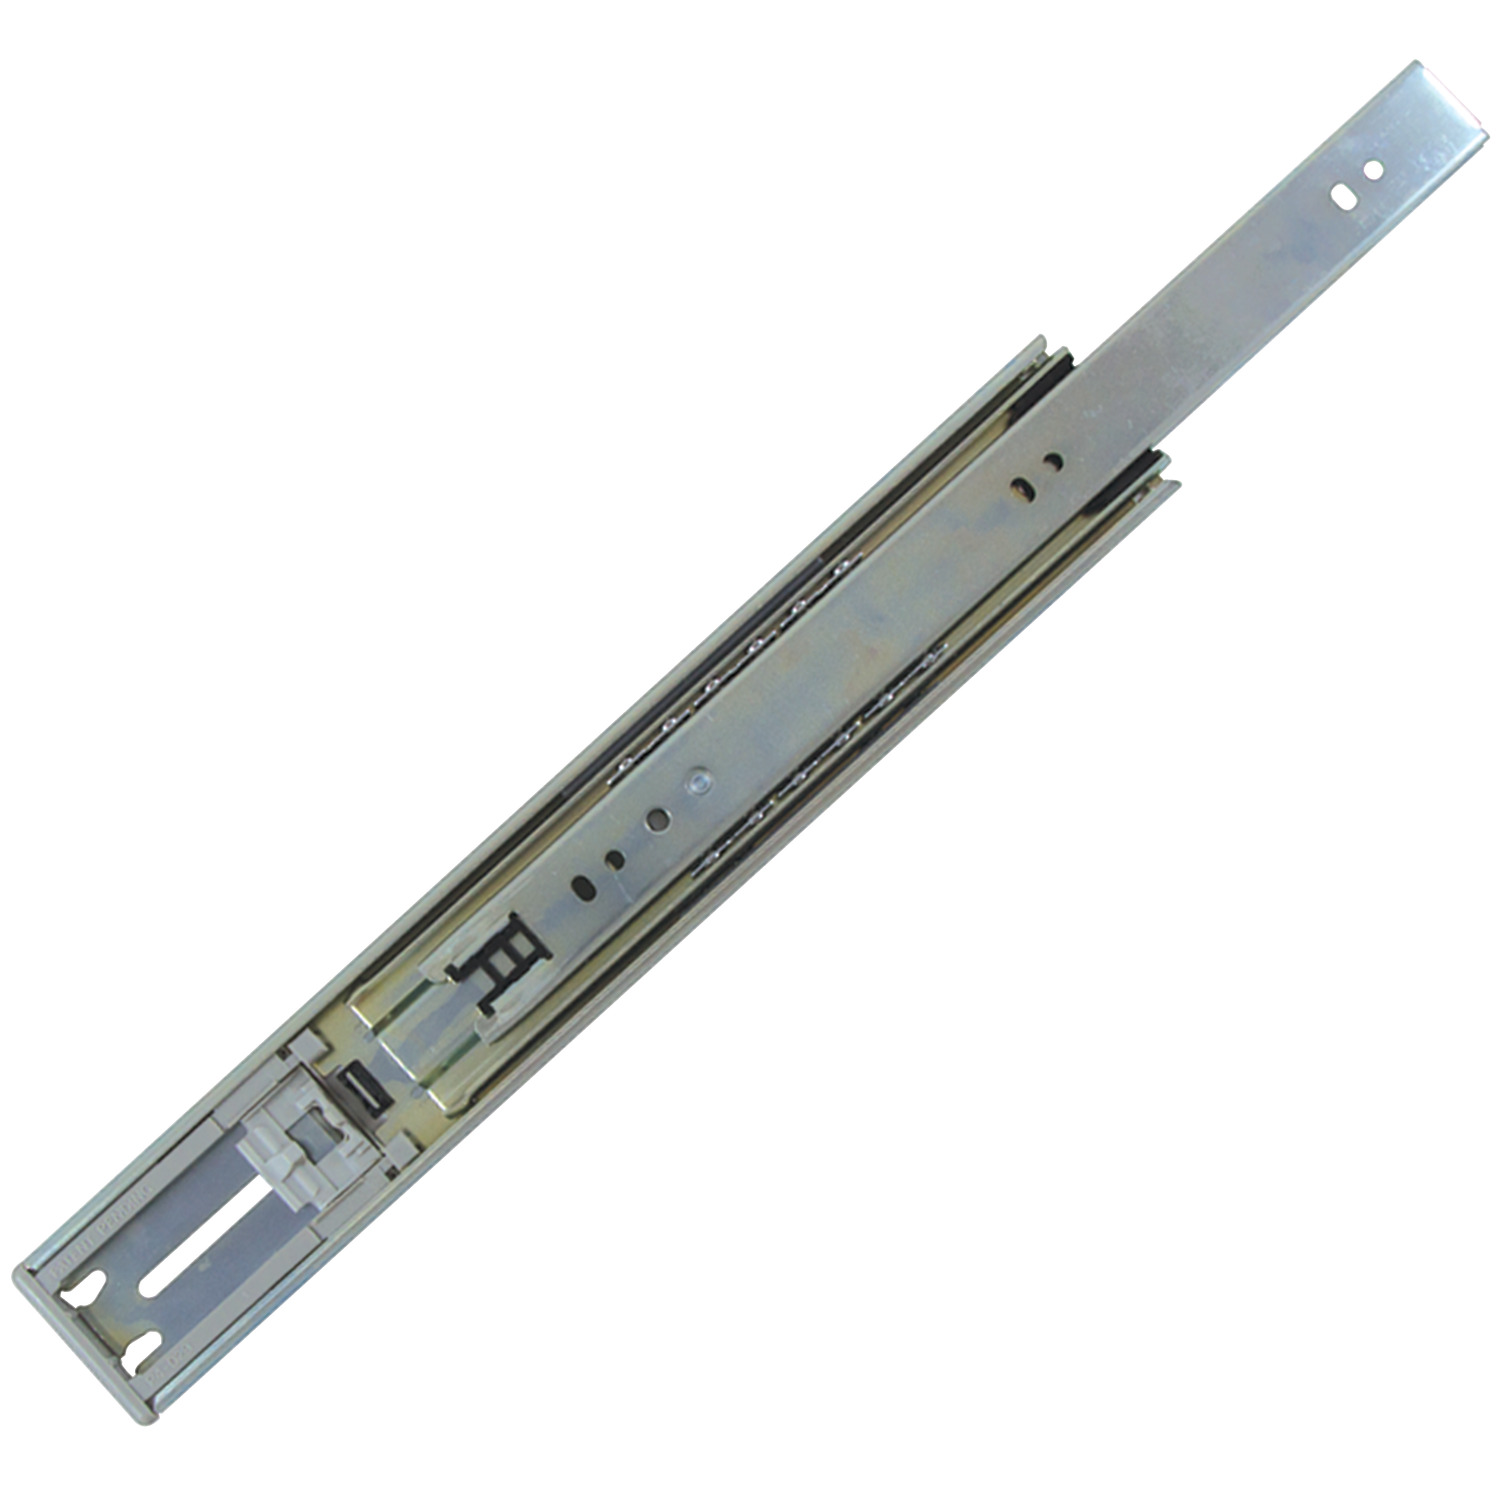 P4100.AC0550 Drawer Slide Full Extn Length 550; Load 45kg per pair. Sold Individually. Lever Disconnect; Soft Close